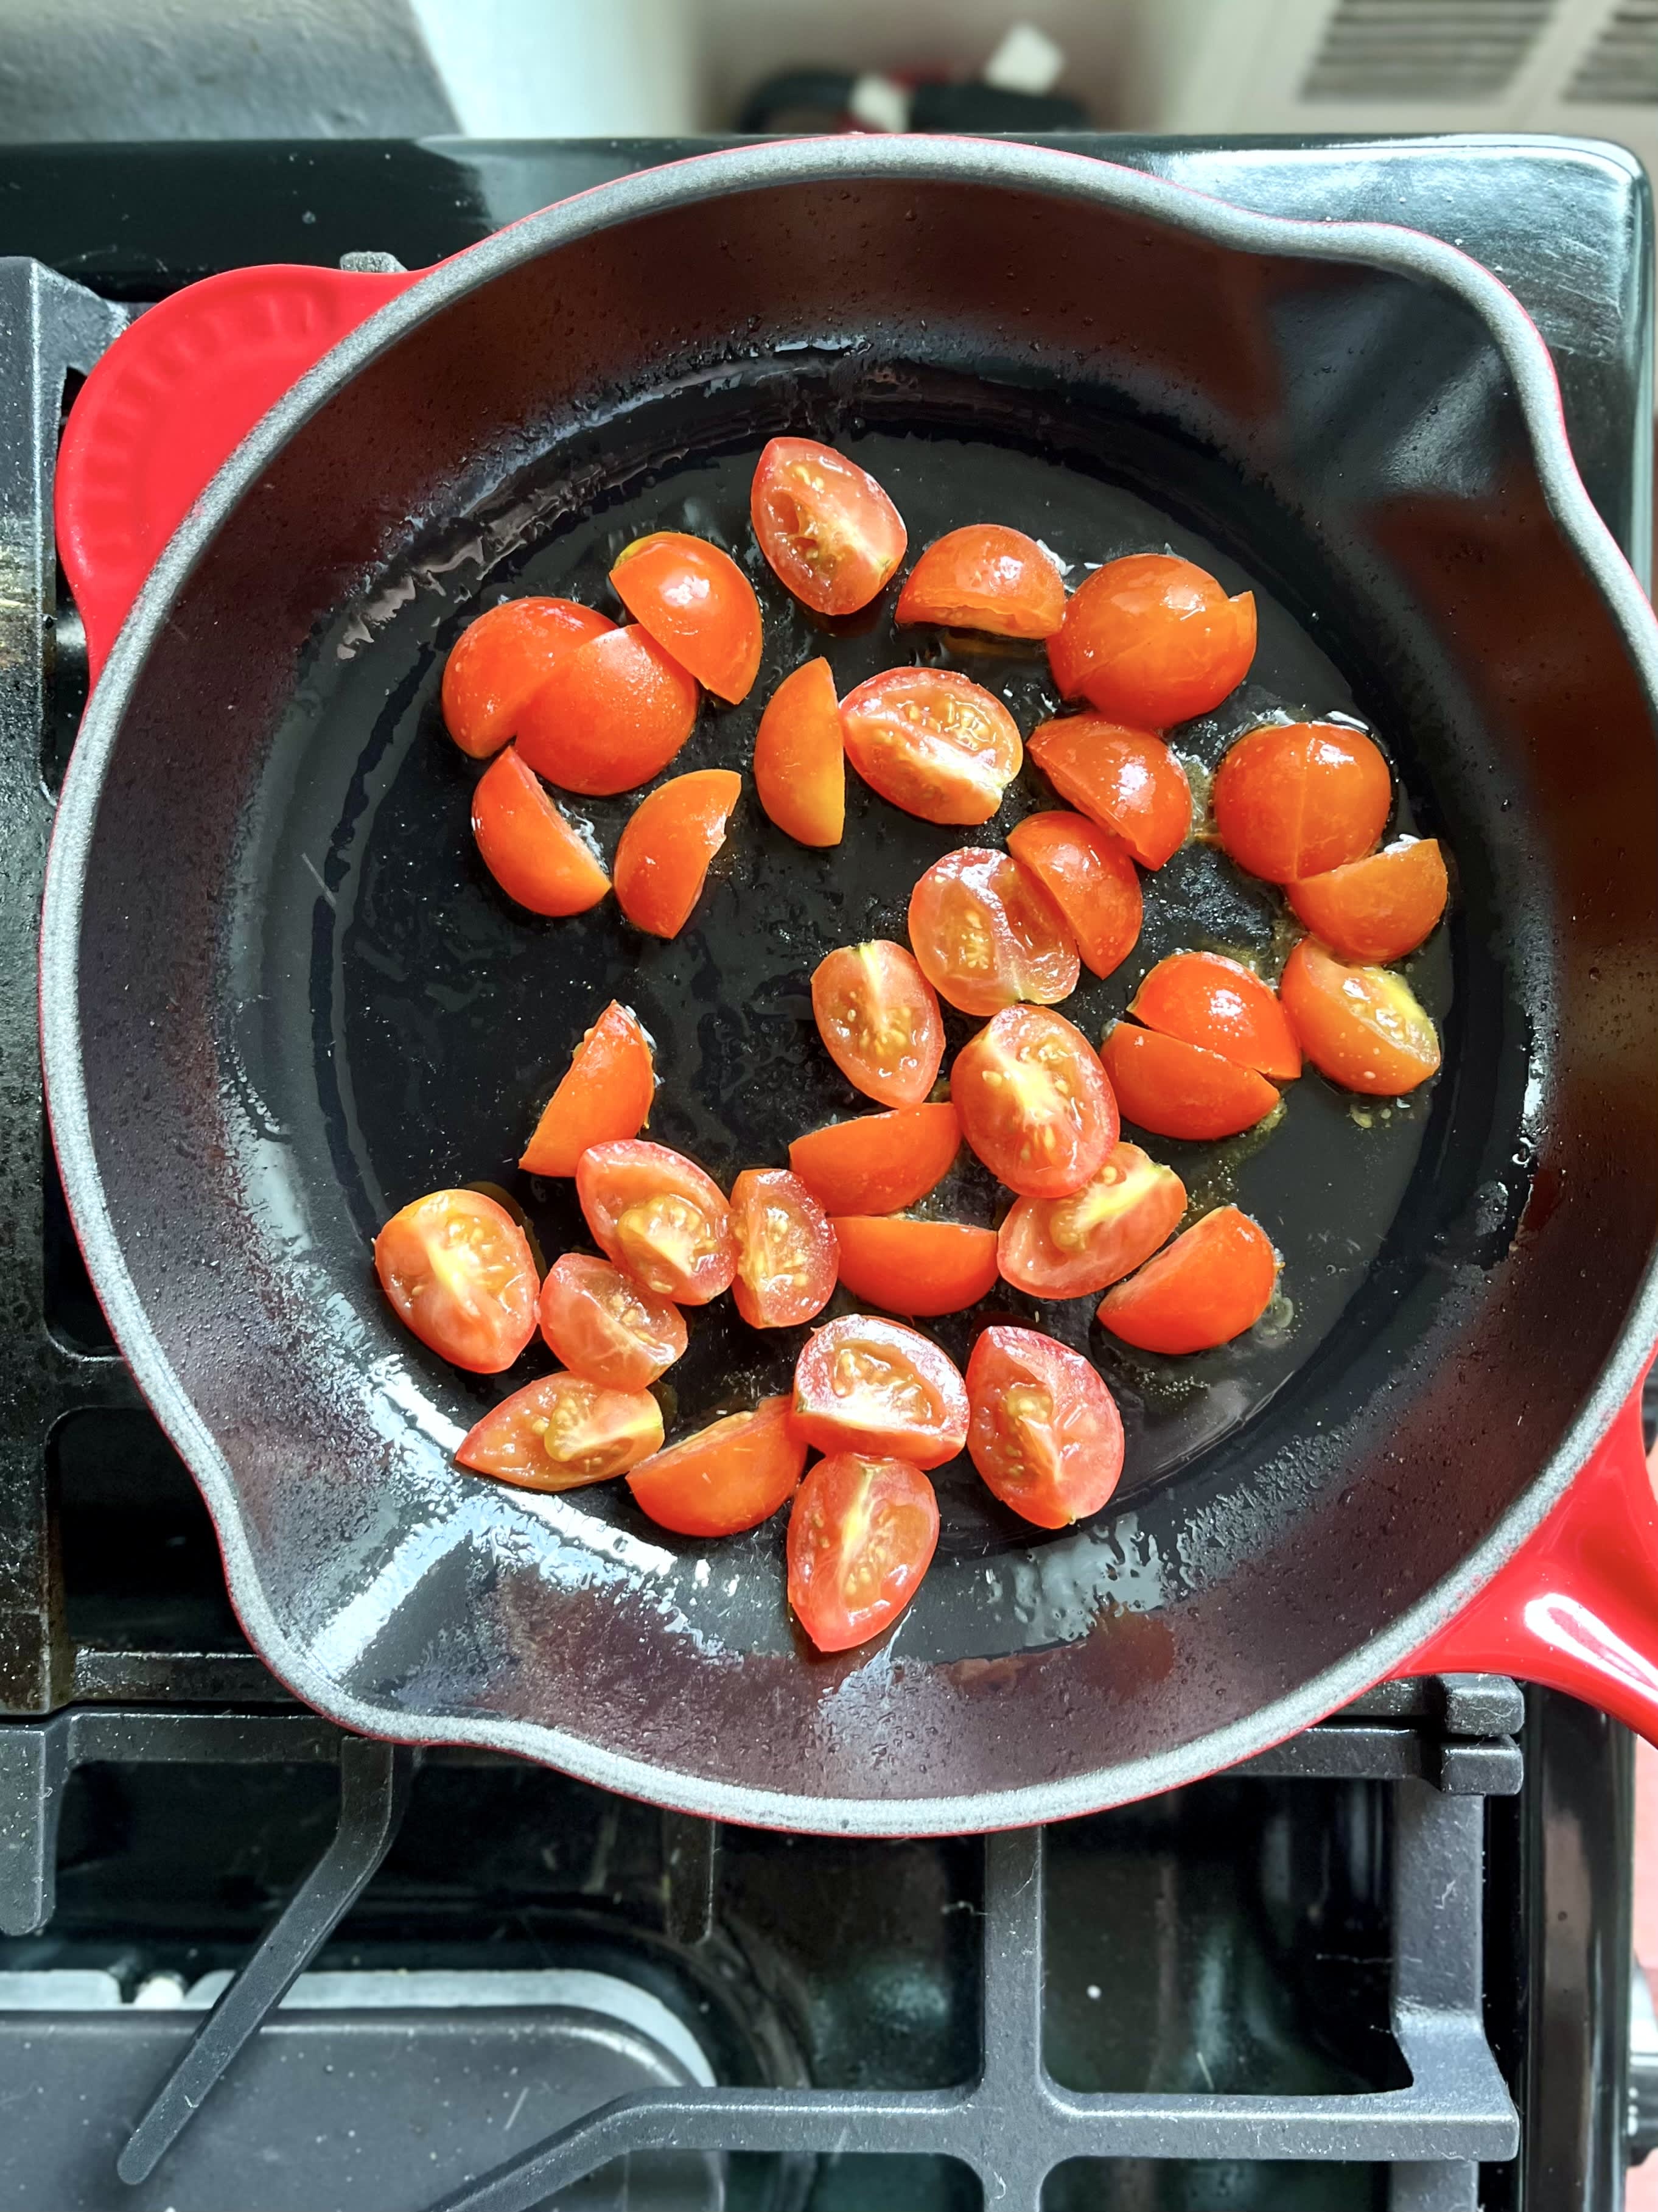 Why I Love the Le Creuset Signature Skillet: Tried & Tested